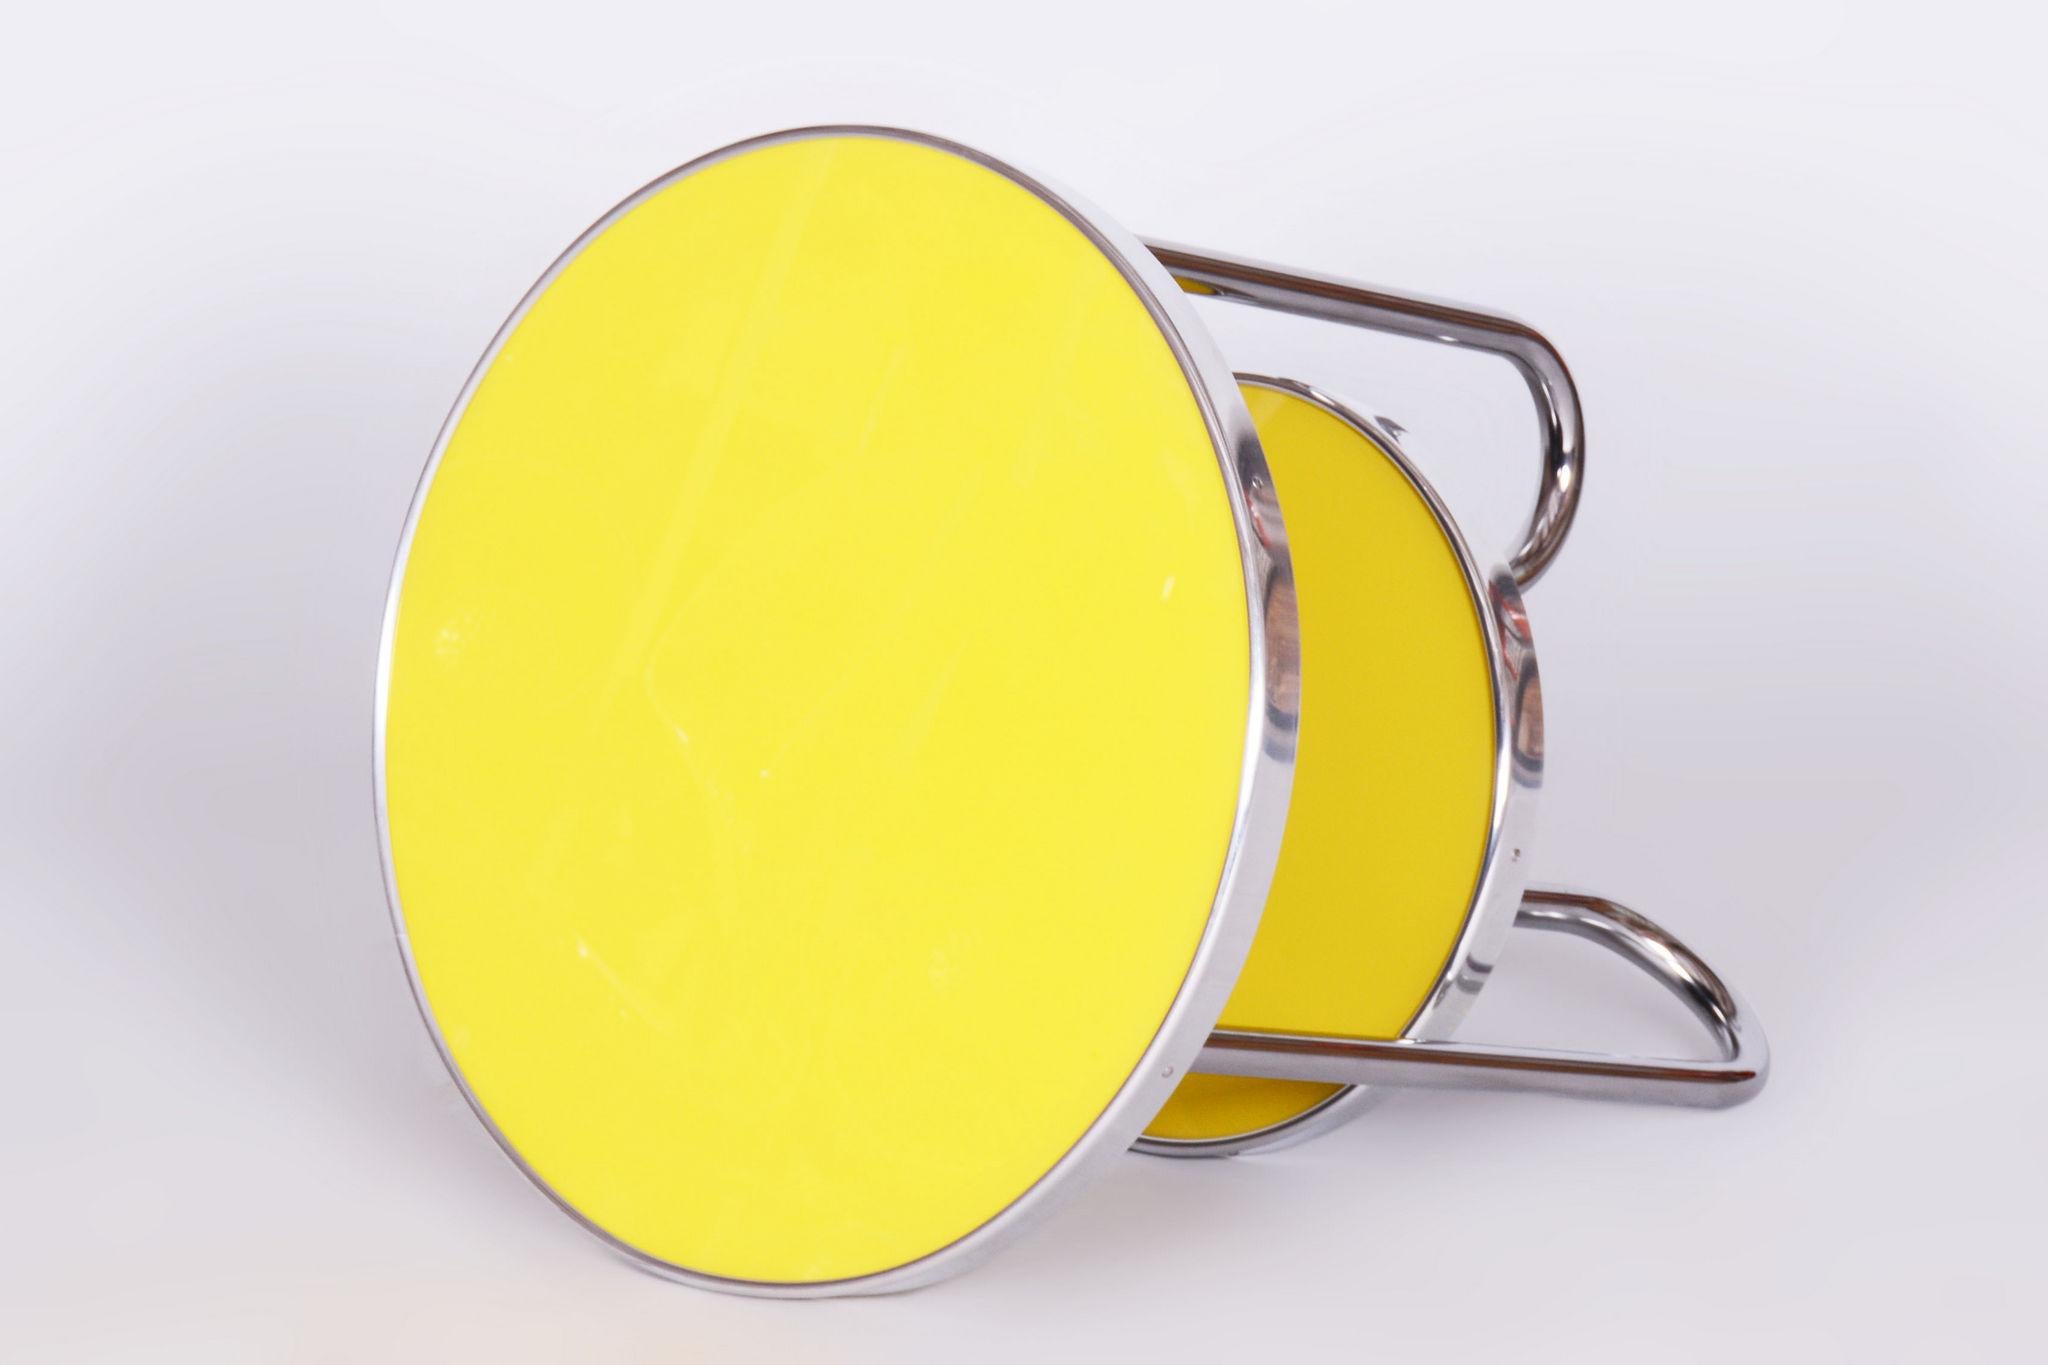 Restored Bauhaus Small Yellow Table Made By Kovona

Period: 1930-1939
Source: Czechia (Czechoslovakia)
Material: Chrome-Plated Steel, Spruce Wood, Glass

Made by Kovona, a renowned Czech manufacturer and dealer from the 20th century.

The chrome